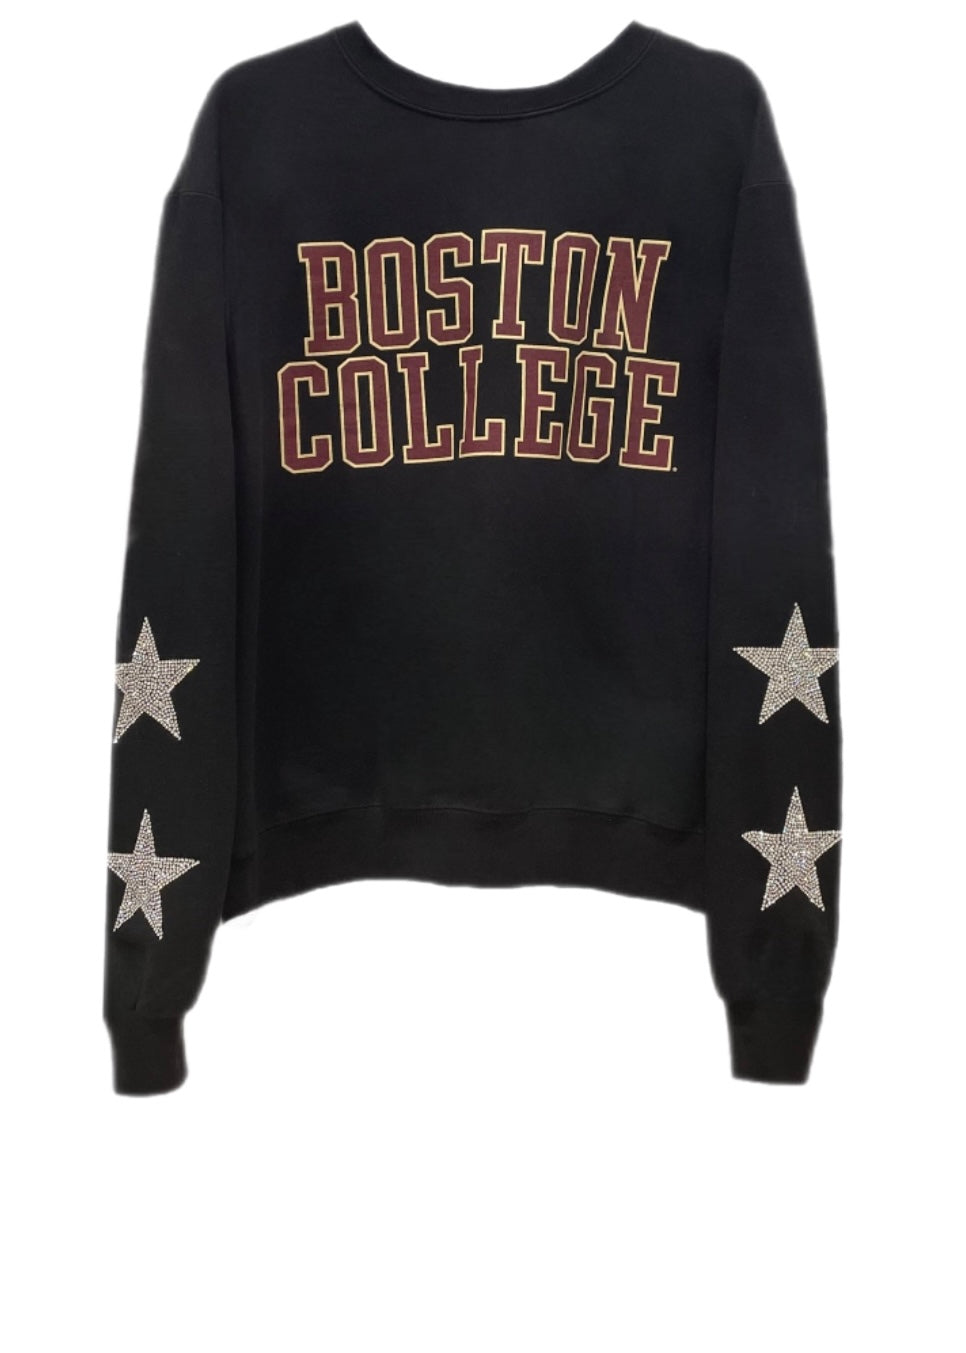 Boston College, BC One of a KIND Vintage Sweatshirt with Crystal Star Design.